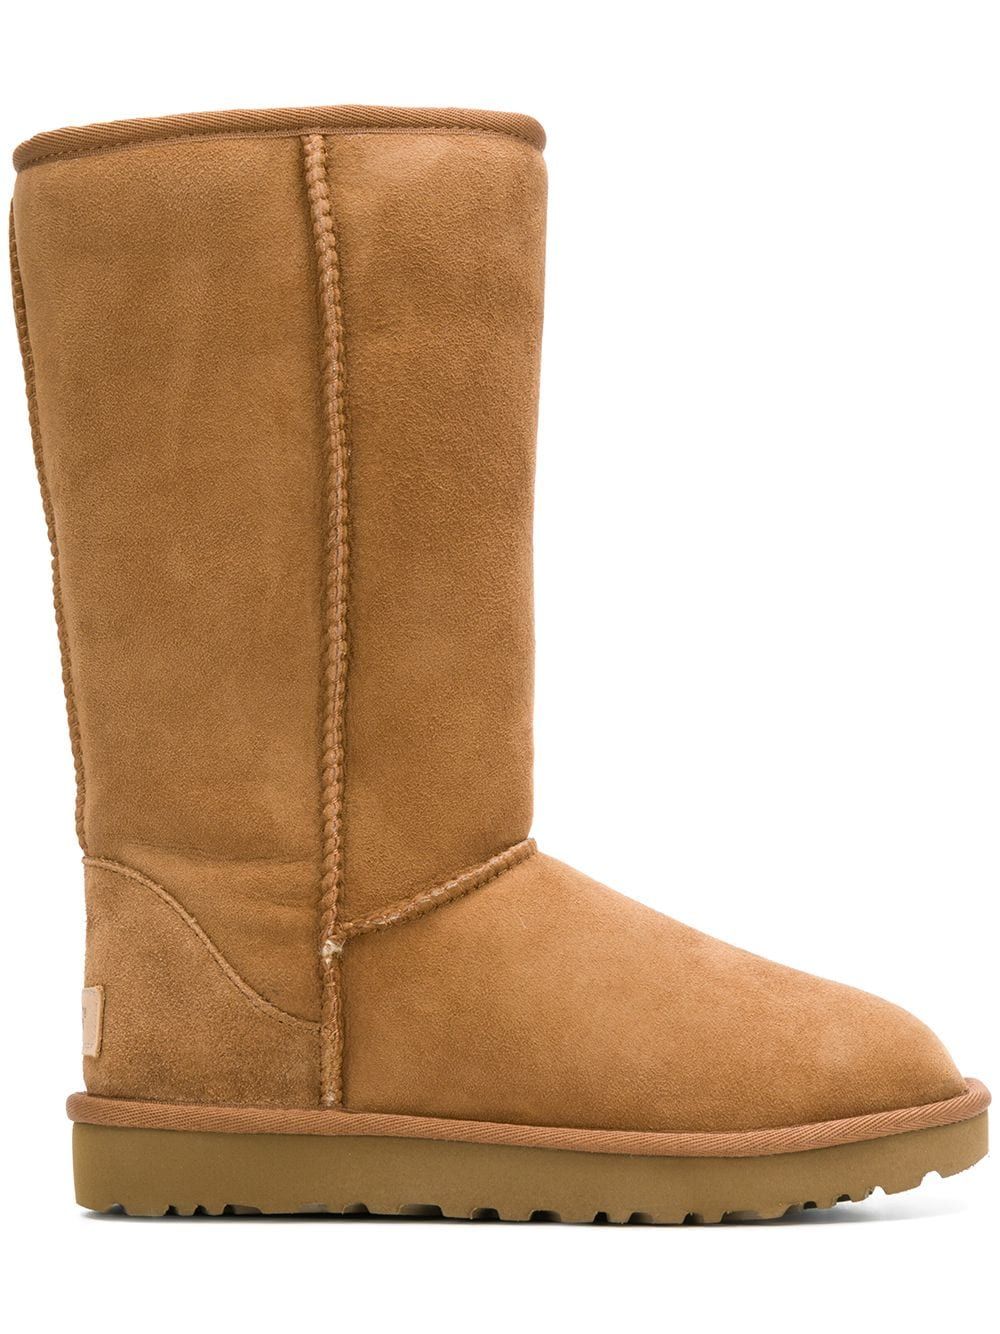 new ugg boots sale